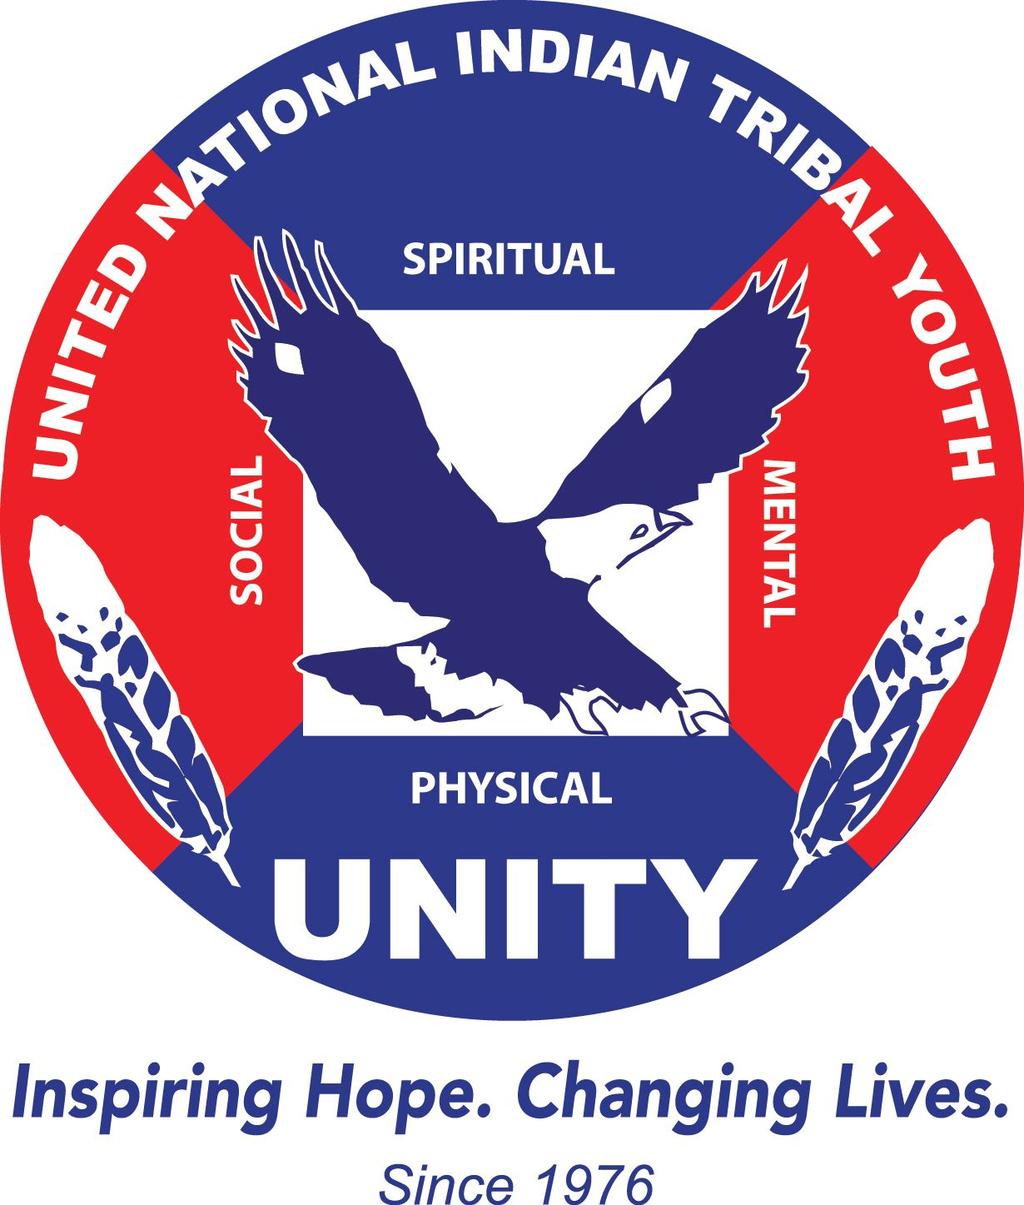 DRAFT AGENDA WELCOME TO THE 2018 NATIONAL UNITY CONFERENCE LIKE & Follow United National Indian Tribal Youth s Facebook & Instagram Page for Conference Updates!